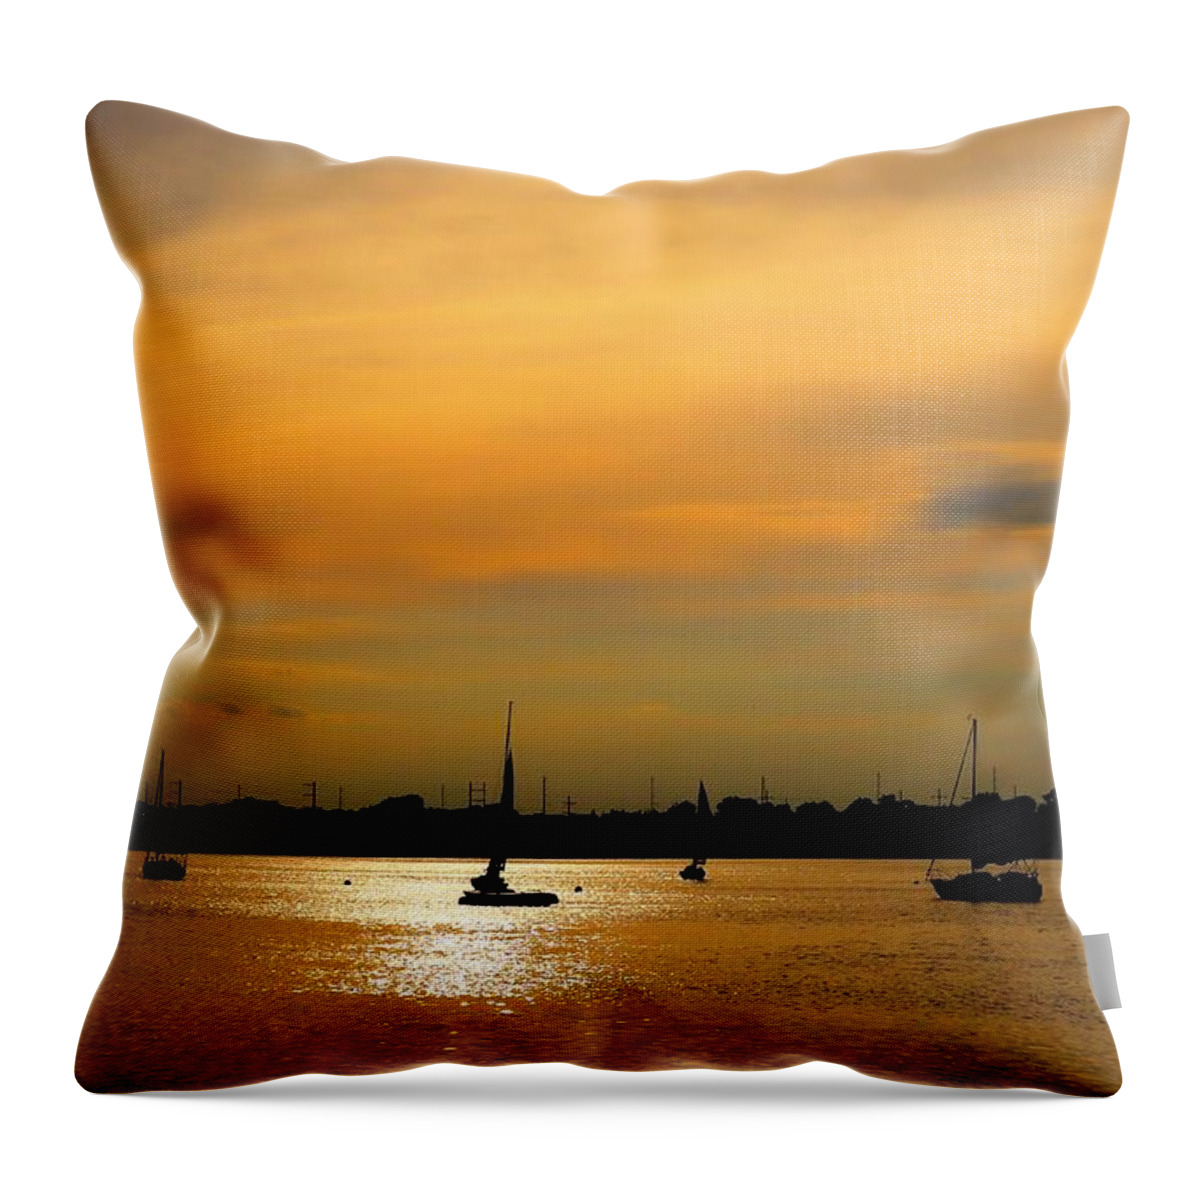 Sailing Throw Pillow featuring the photograph Sunset Sailing by Linda Stern